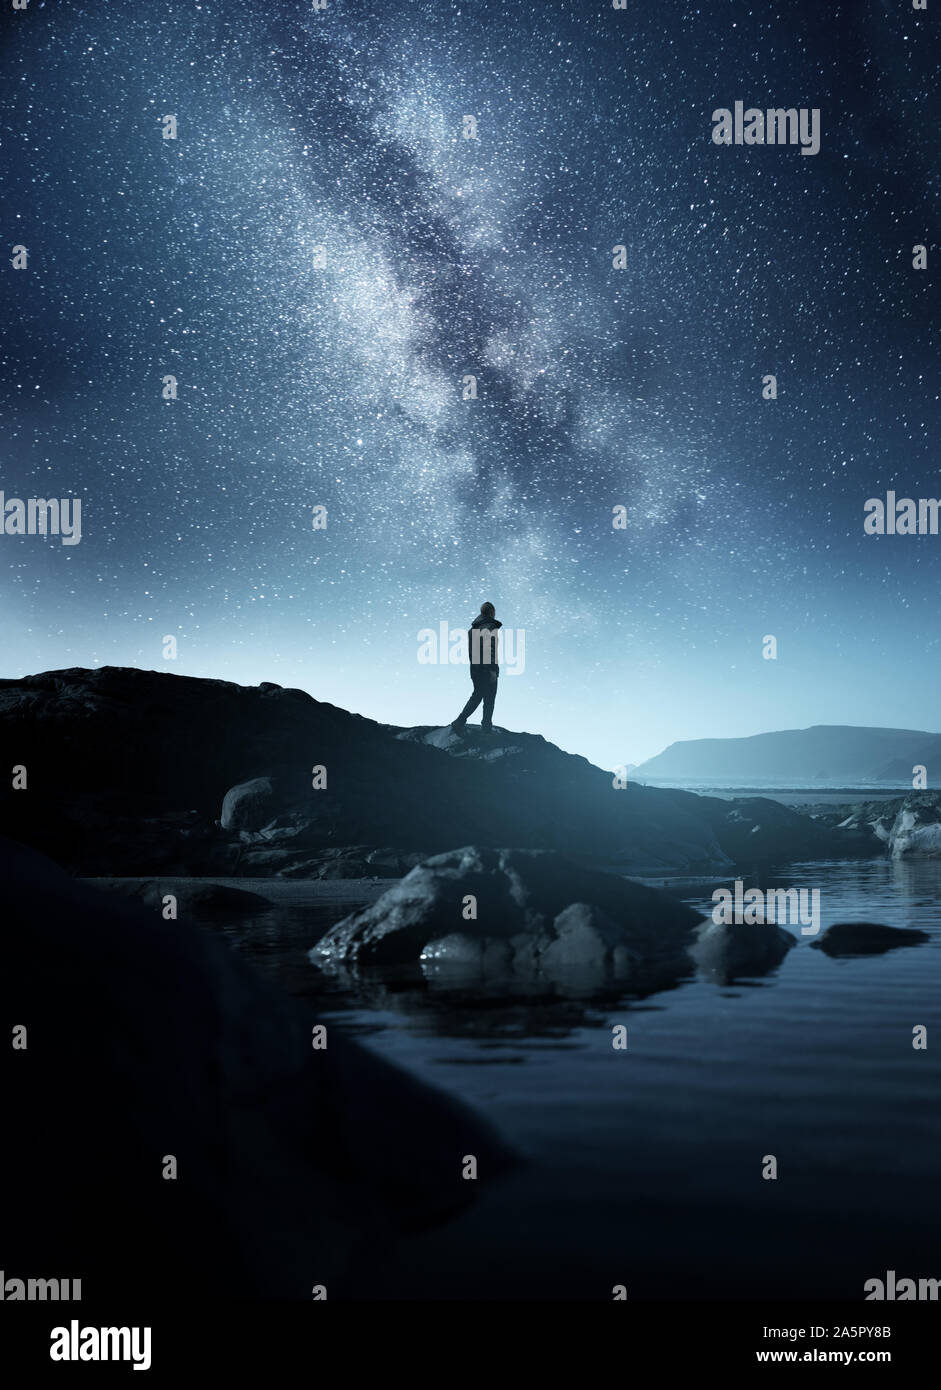 Calm Midnight adventures. A long exposure shot of a man staring up into the night sky, silhouetted against the milky way galaxy. Photo compsoite. Stock Photo